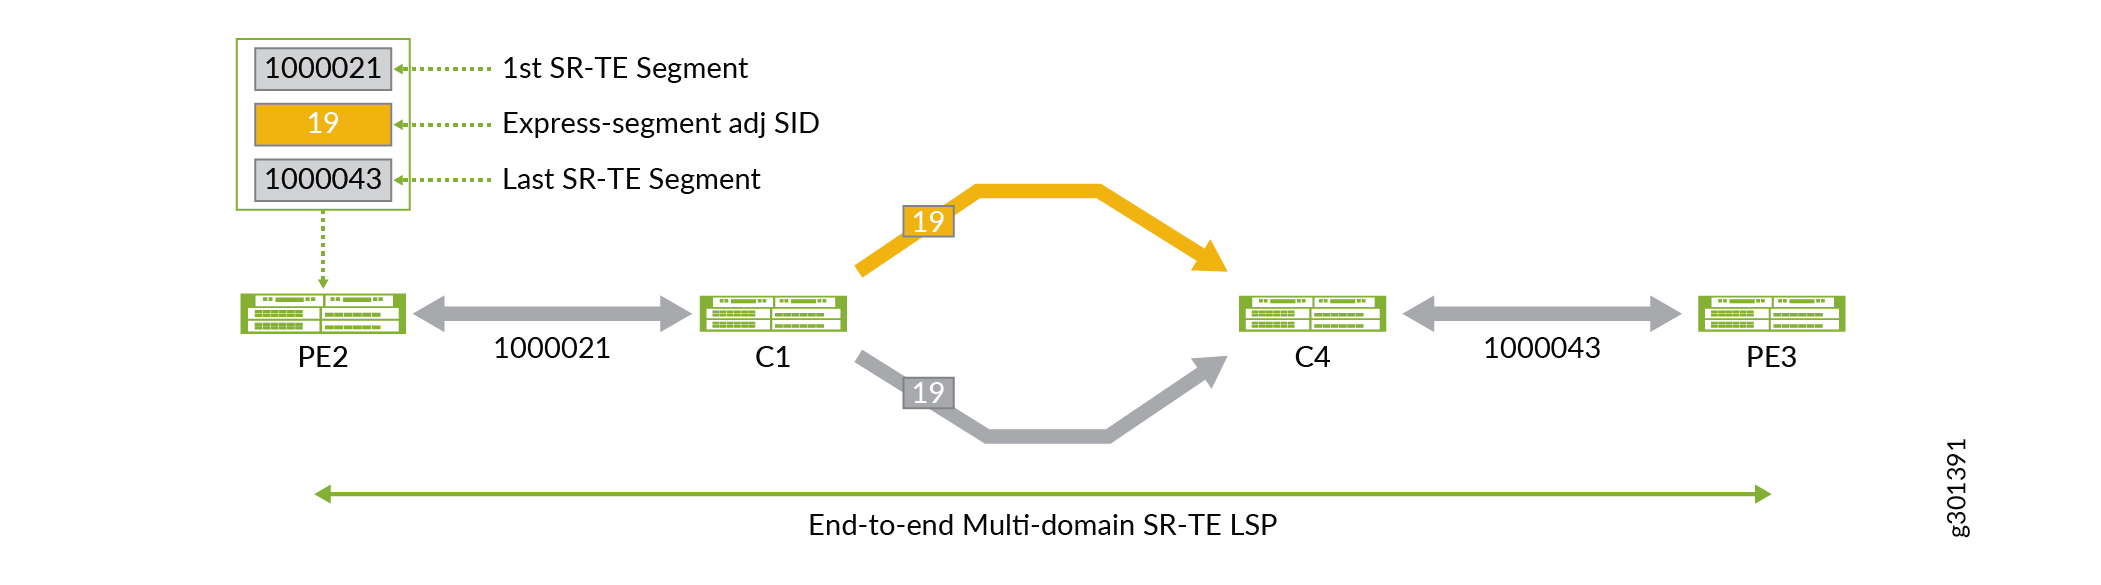 Multi-domain End-to-End SR-TE LSP